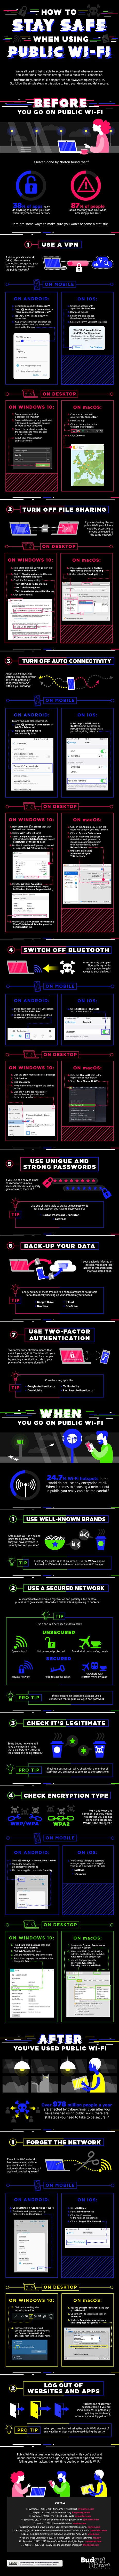 How to stay safe when using public wifi [Infographic]